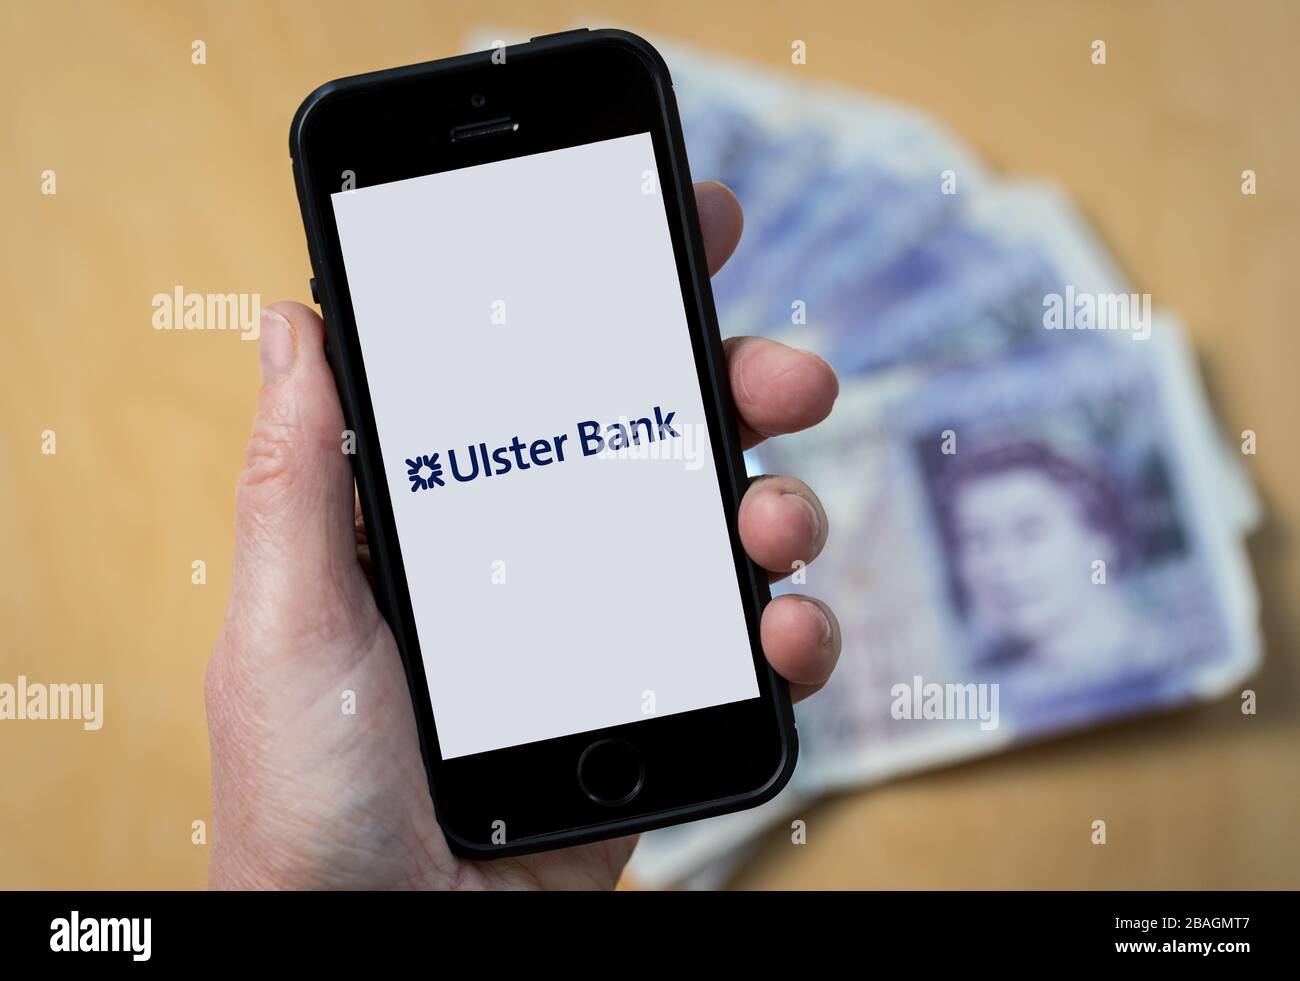 A woman looking at the Ulster Bank logo on a mobile phone. (editorial Use Only) Stock Photo